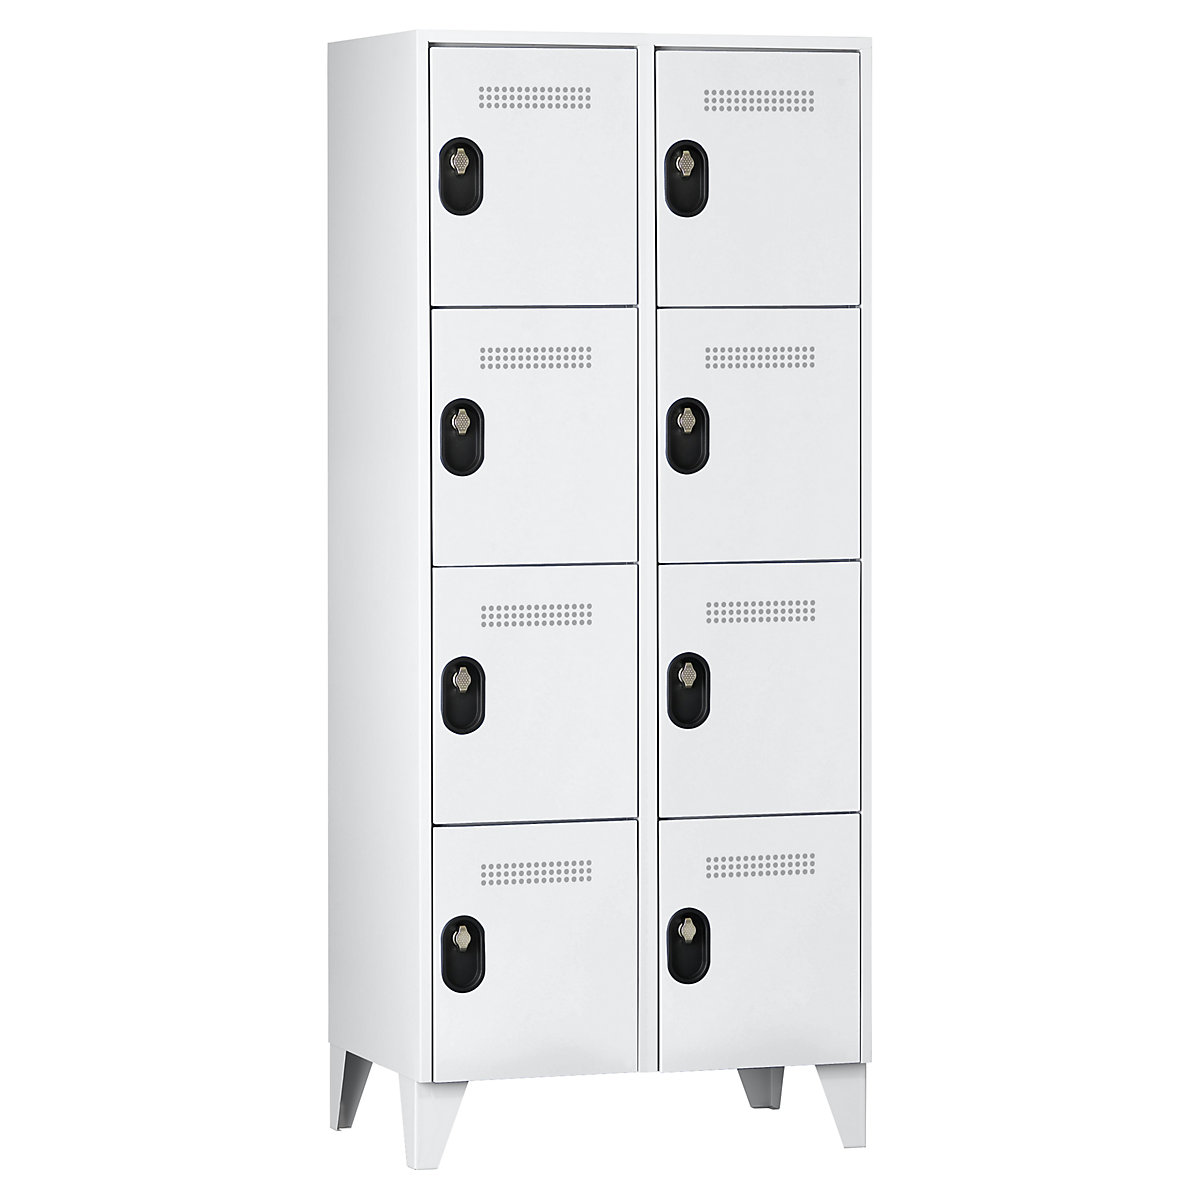 Compartment locker, compartment height 450 mm – Wolf